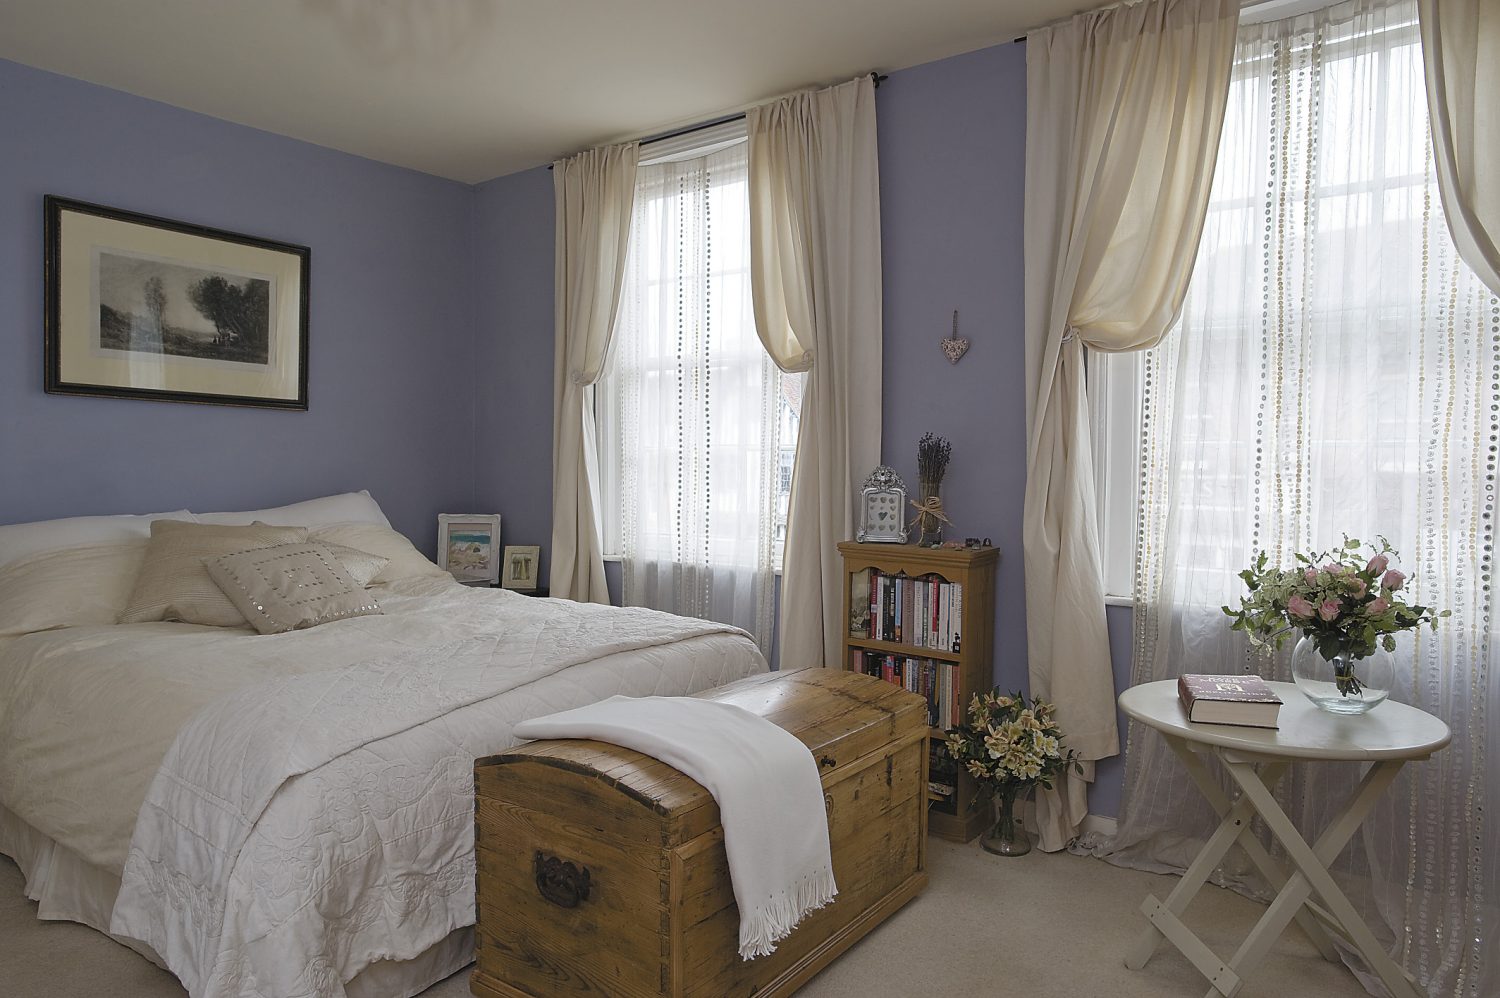 the main bedroom has lilac walls and ivory curtains. The lithograph above the bed is French